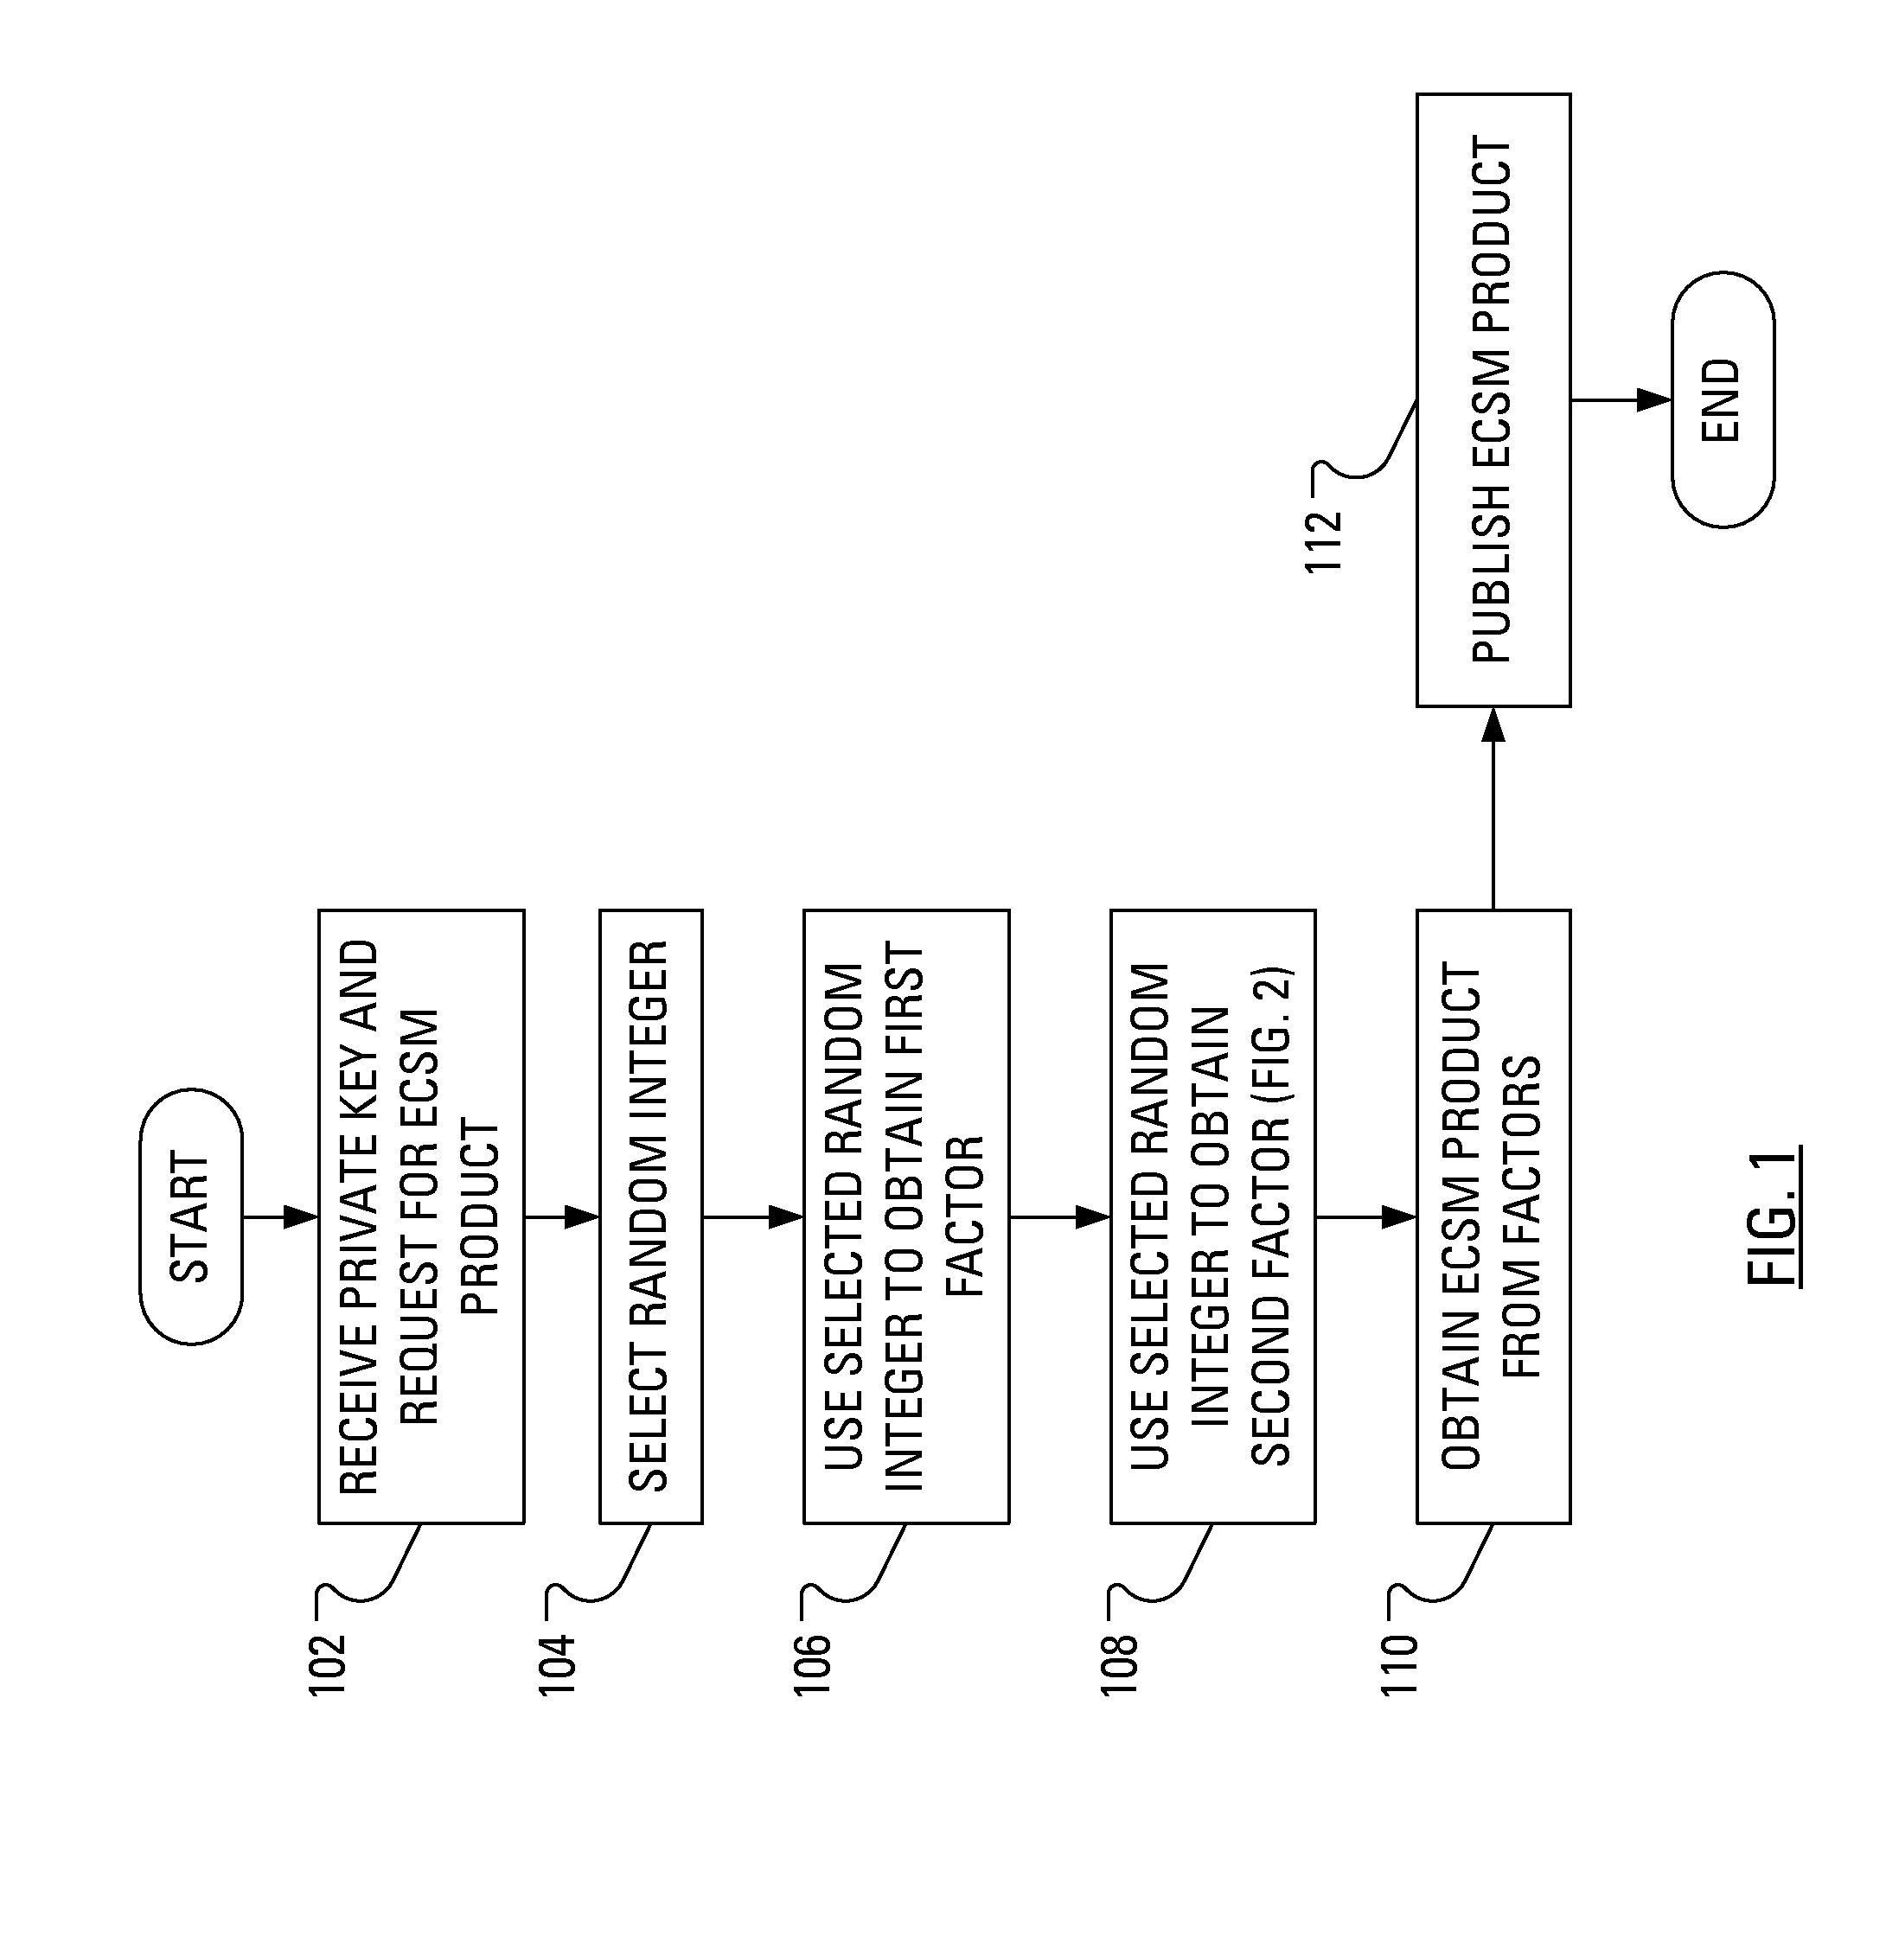 Method and Apparatus for Performing Elliptic Curve Scalar Multiplication in a Manner that Counters Power Analysis Attacks